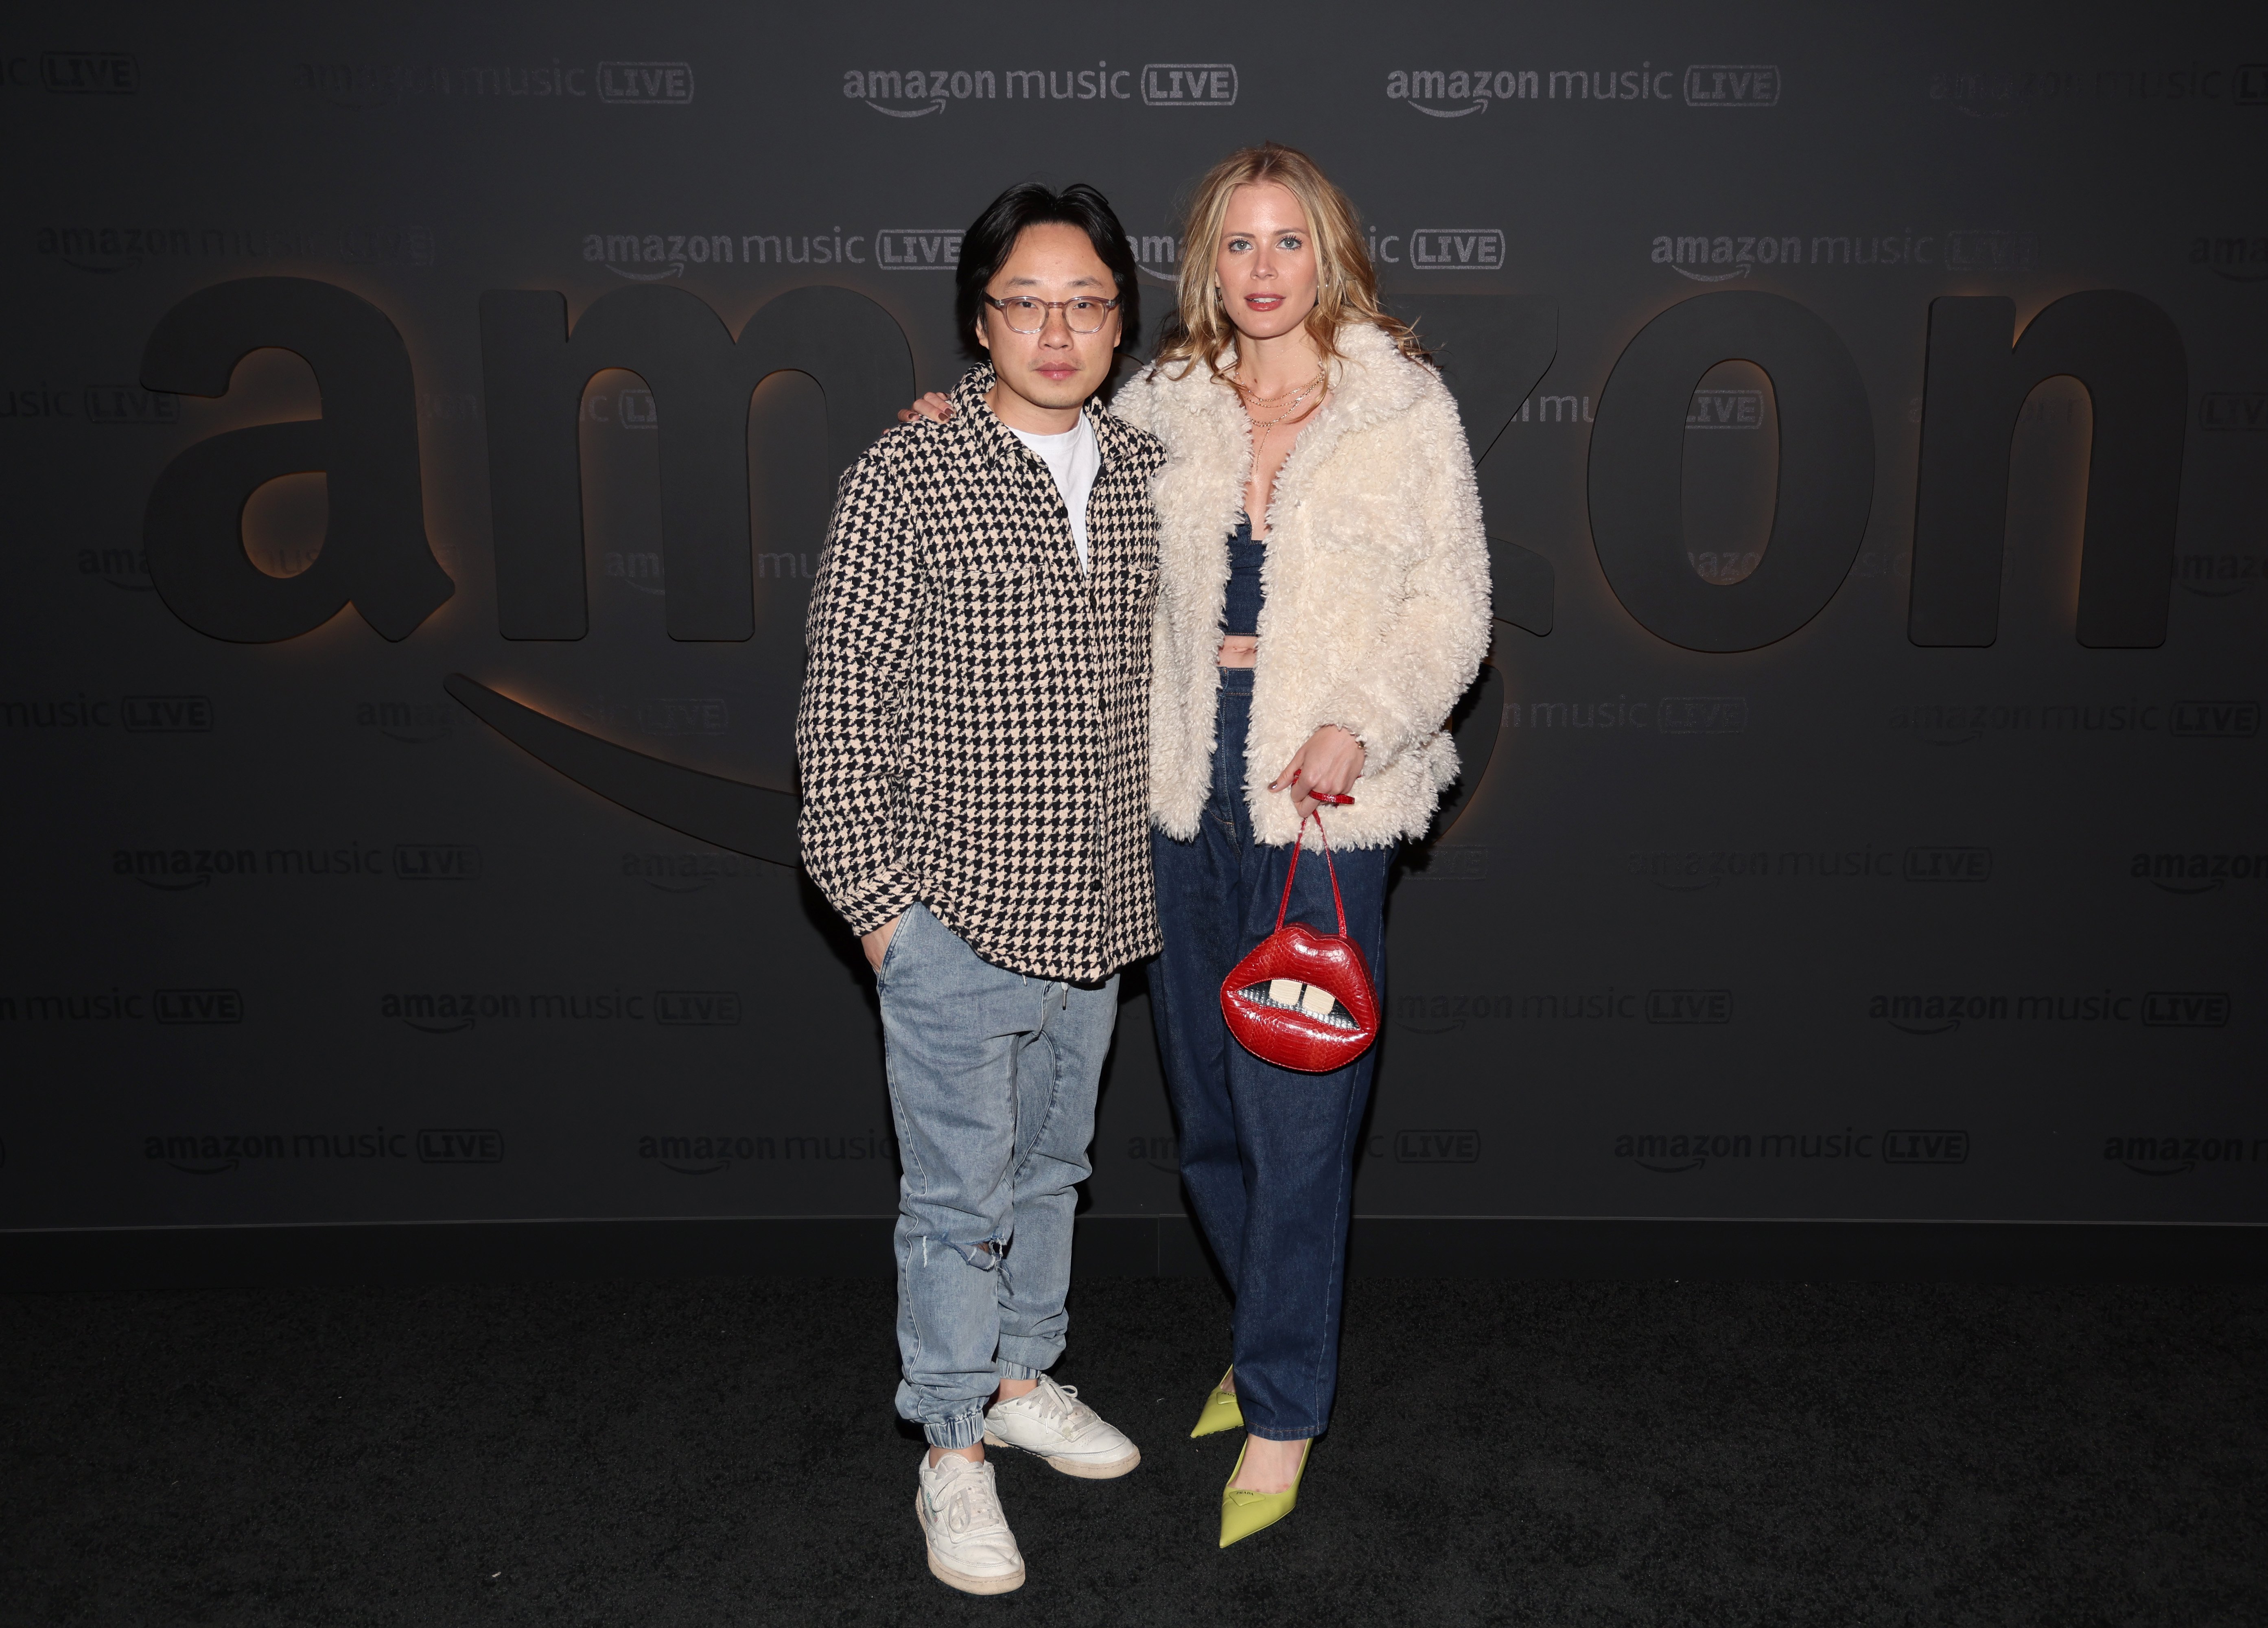 Jimmy O. Yang and Brianne Kimmel at the Amazon Music Live Concert Series in Los Angeles, California, on November 03, 2022. | Source: Getty Images